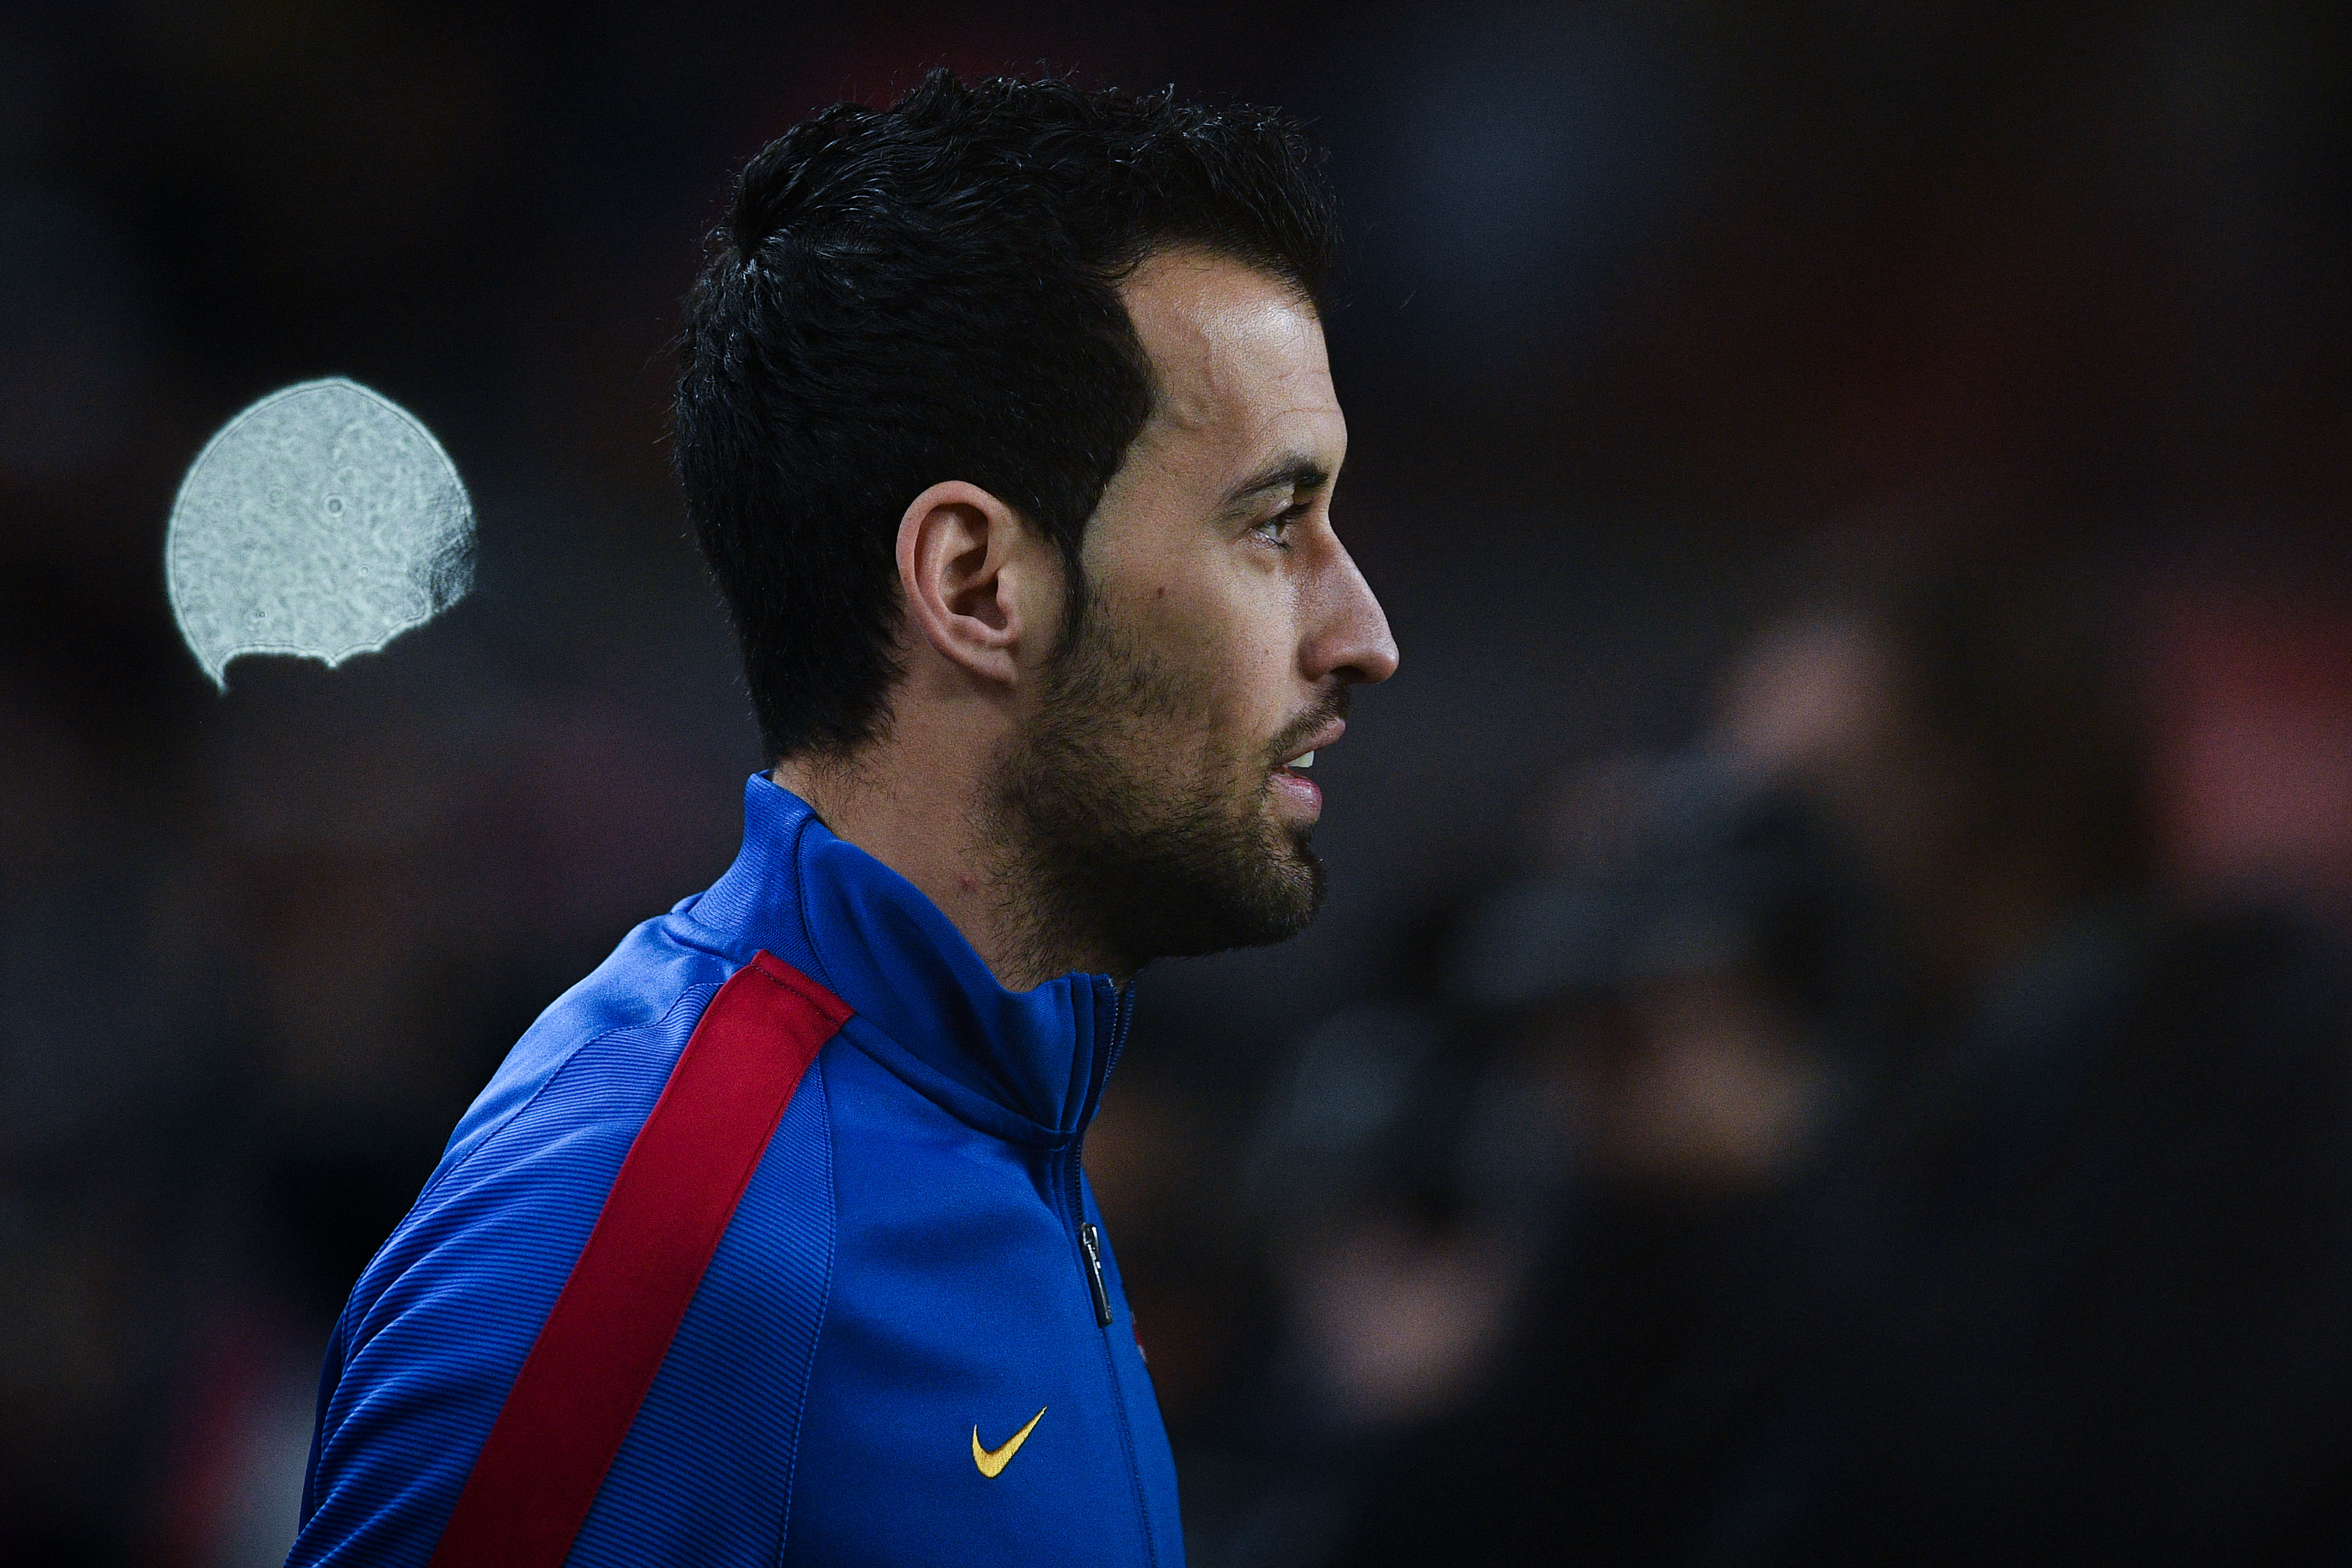 BARCELONA, SPAIN - JANUARY 11:  Sergio Busquets of FC Barcelona looks on prior to the kick-off of the Copa del Rey round of 16 second leg match between FC Barcelona and Athletic Club at Camp Nou on January 11, 2017 in Barcelona, Spain.  (Photo by David Ramos/Getty Images)